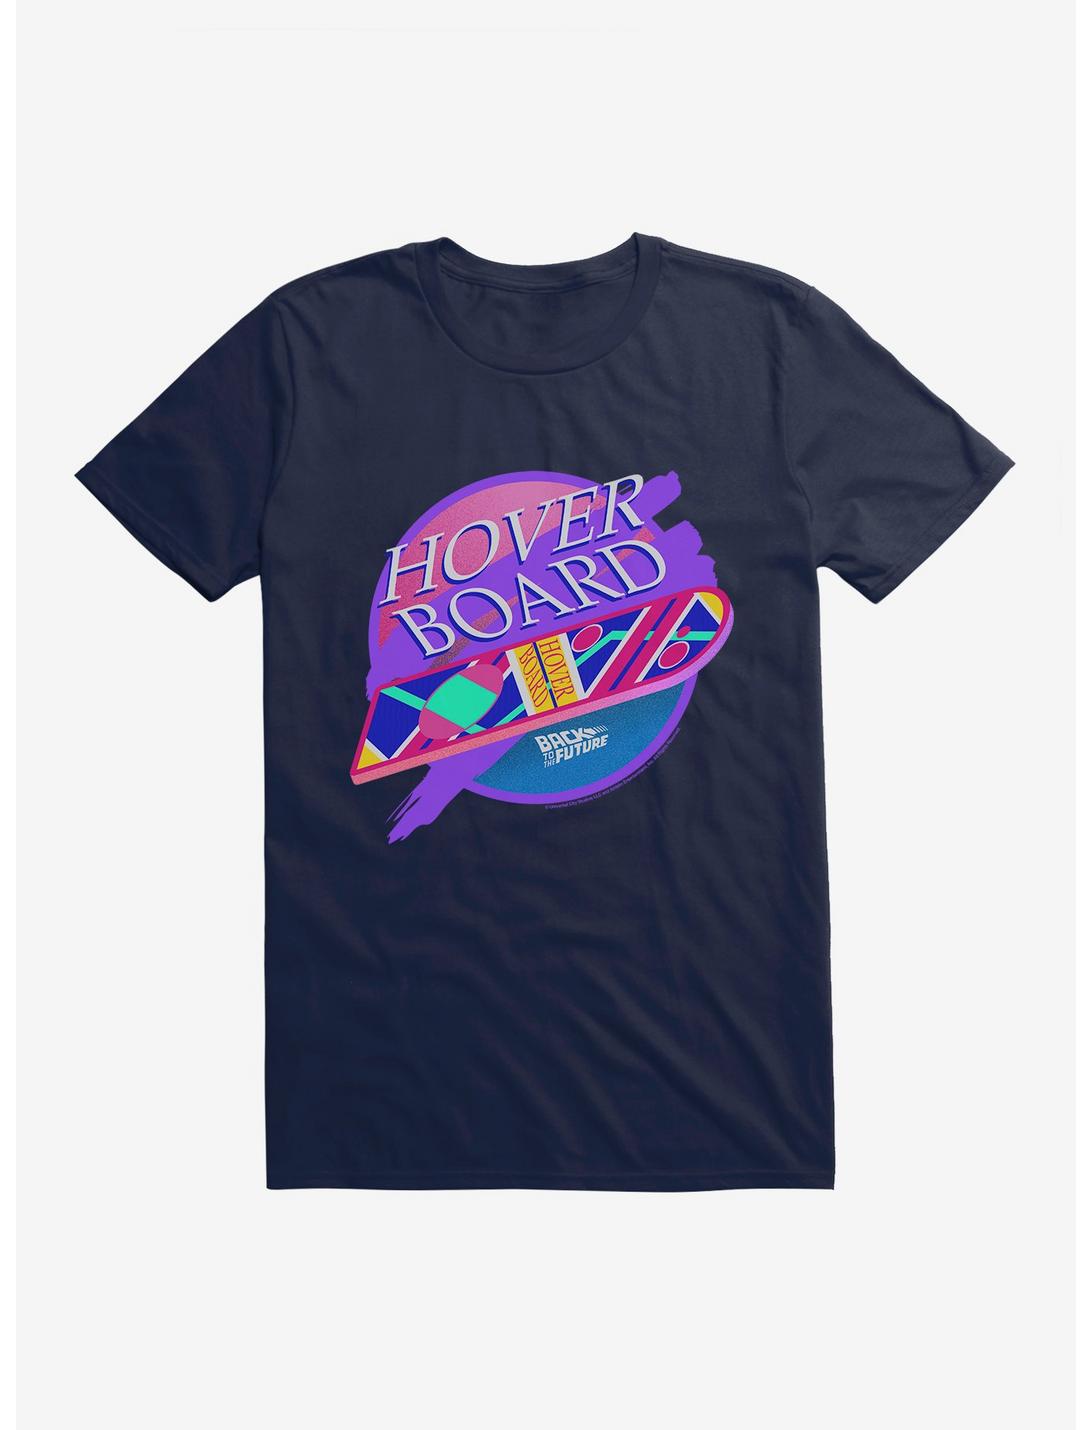 Back To The Future Hover Board T-Shirt, MIDNIGHT NAVY, hi-res